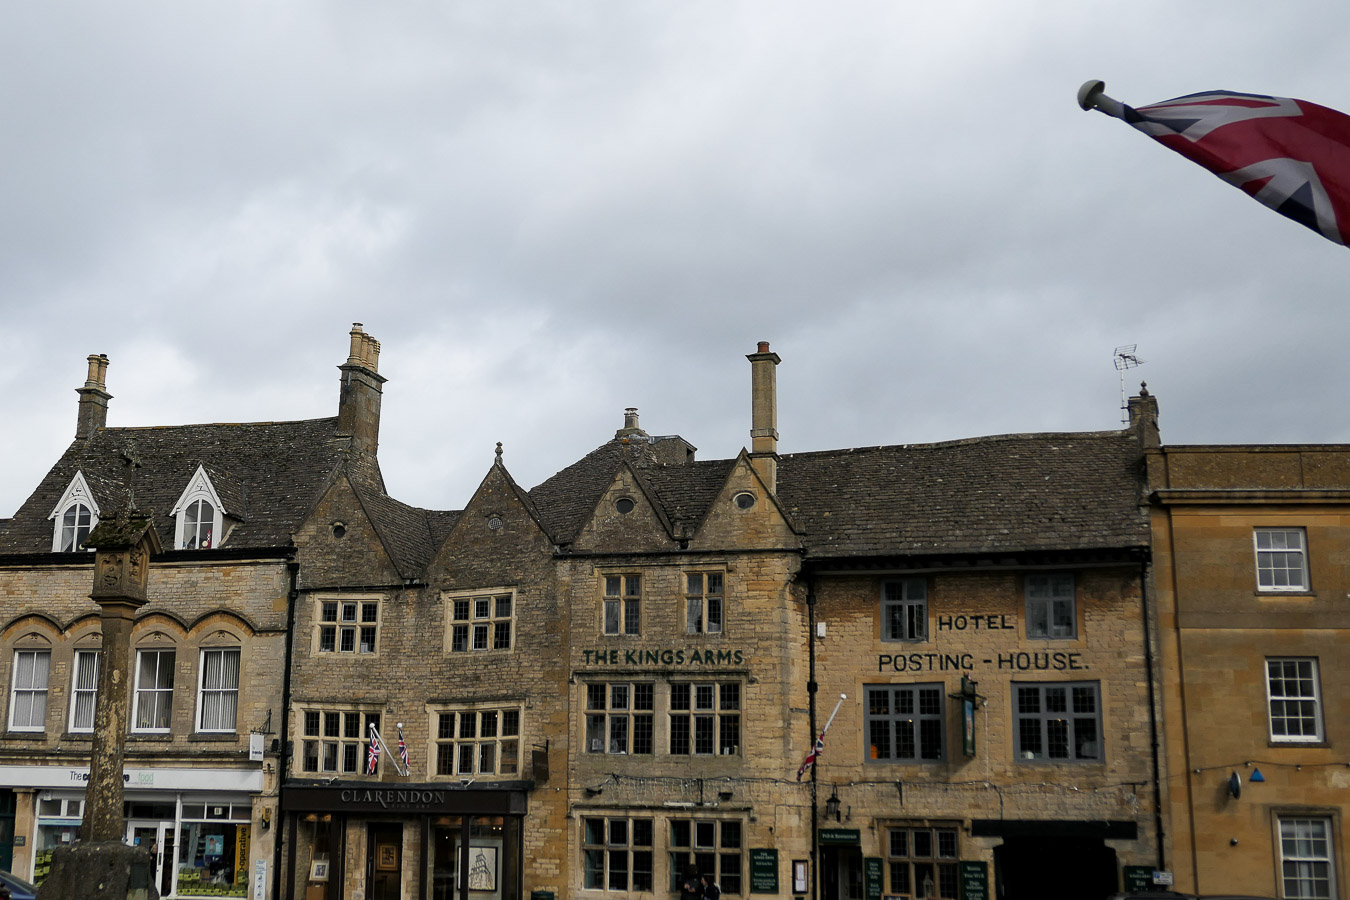 What to Do in the Cotswolds - Stow-on-the-Wold - English Countryside